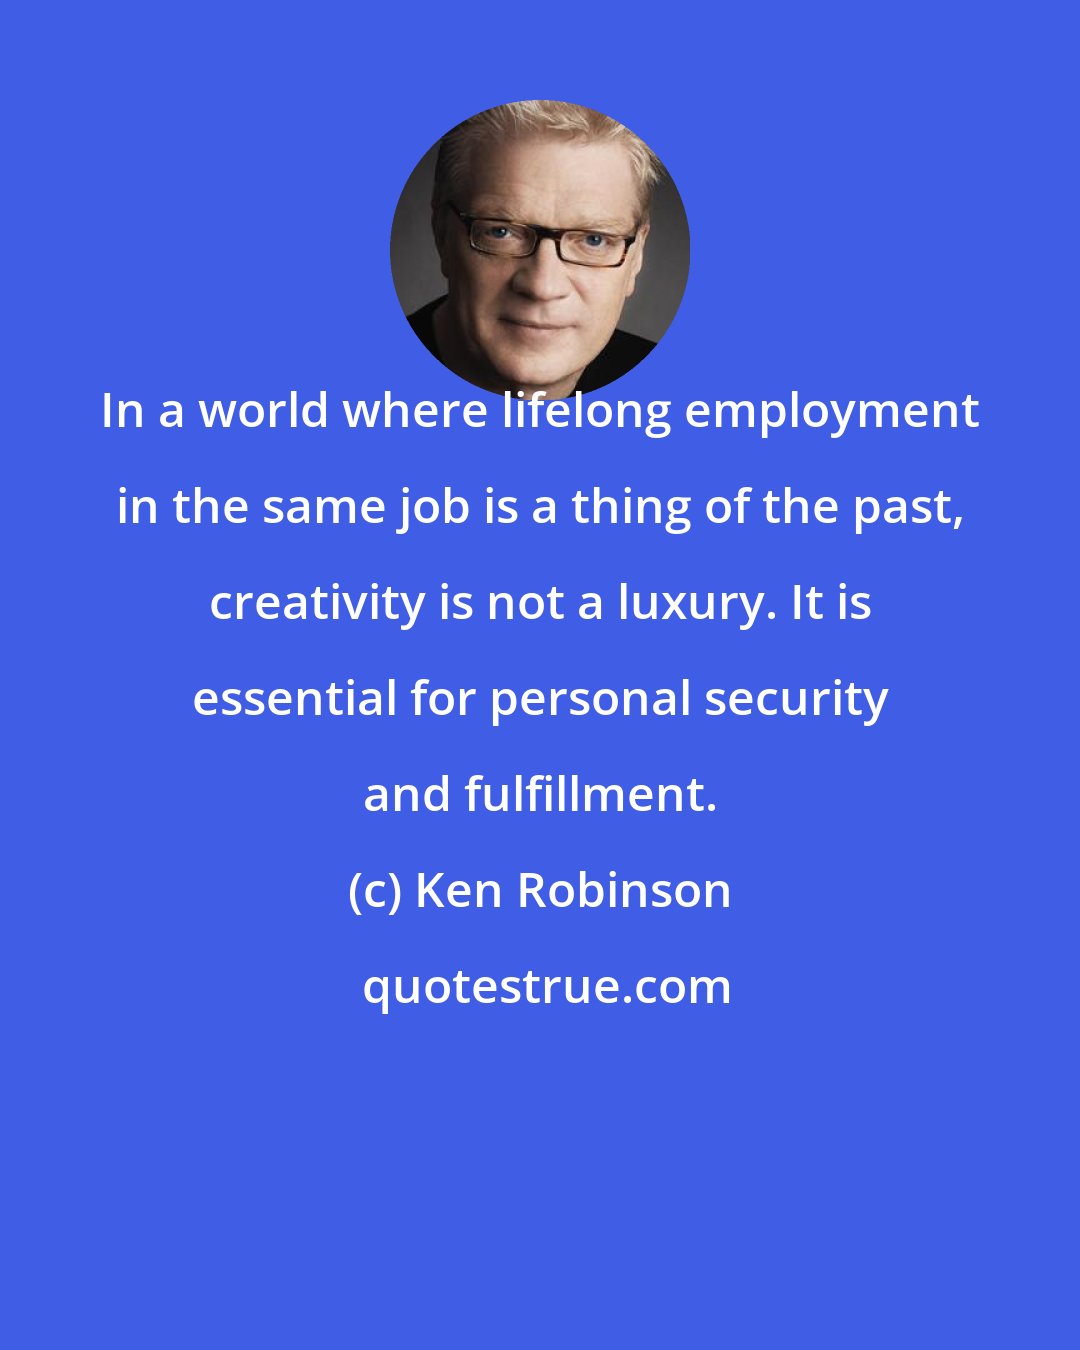 Ken Robinson: In a world where lifelong employment in the same job is a thing of the past, creativity is not a luxury. It is essential for personal security and fulfillment.